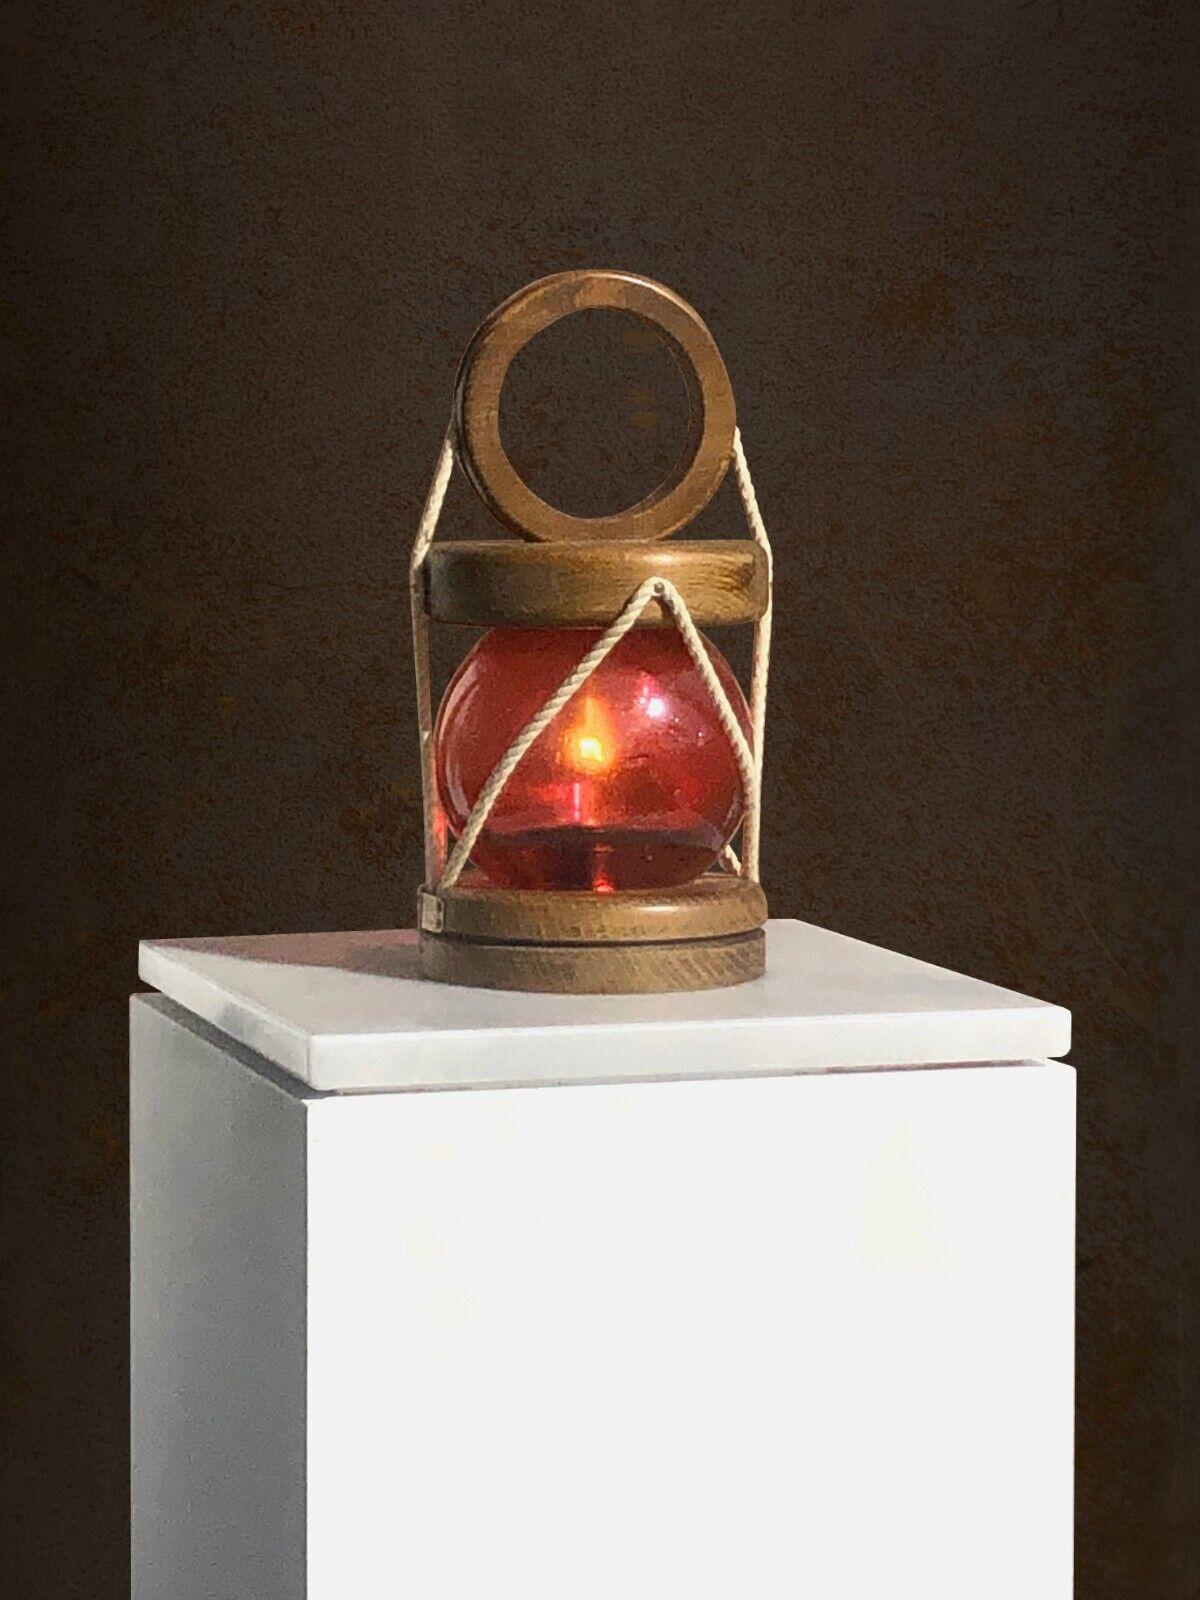 A small and charming Table Lamp, Night Light or Lantern, Modernist, Rustic-Modern, Art-Popular, Brutalist, Shabby-Chic, circular wooden base, body in a ball of red blown glass from Biot structured by fine ropes, lid with particularly graphic